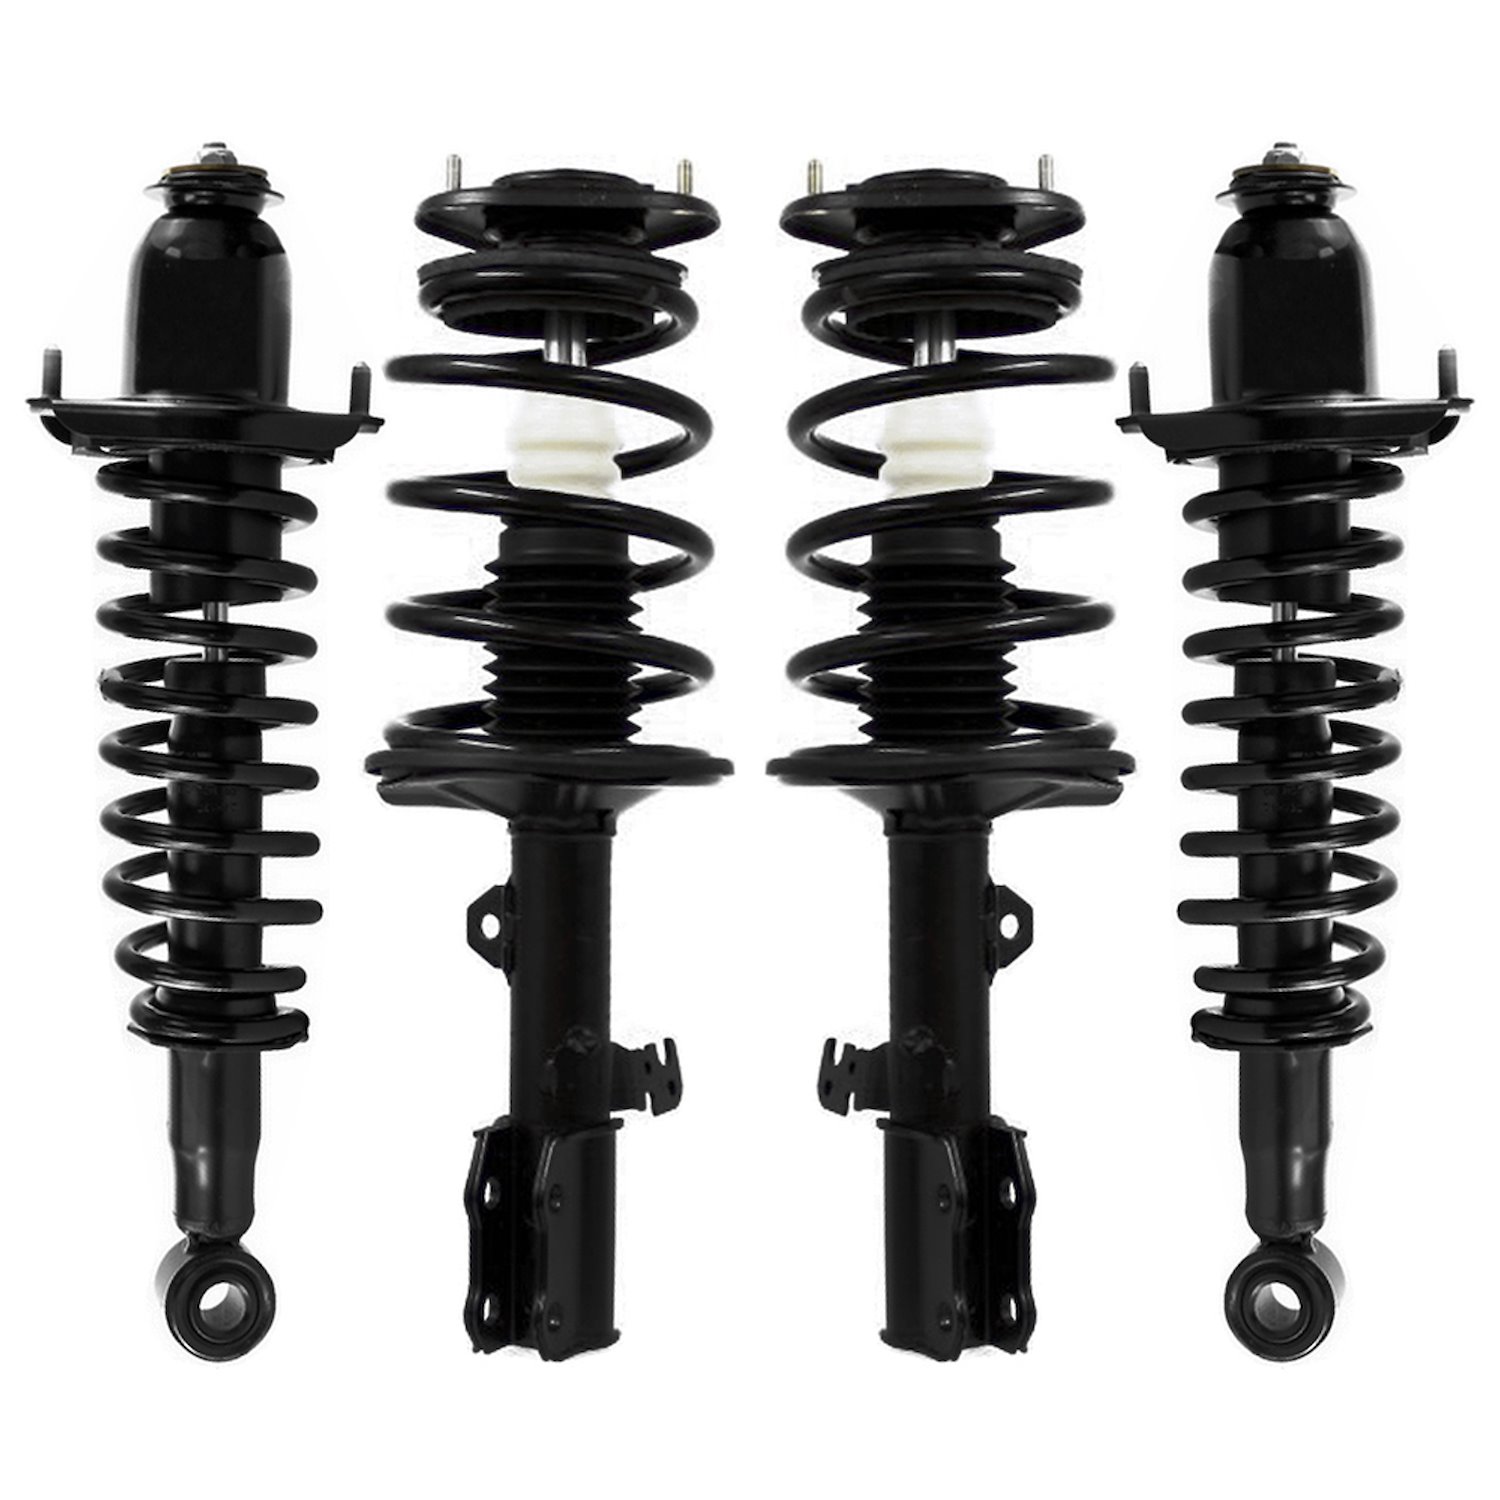 4-11751-15371-001 Front & Rear Suspension Strut & Coil Spring Assembly Kit Fits Select Toyota Corolla